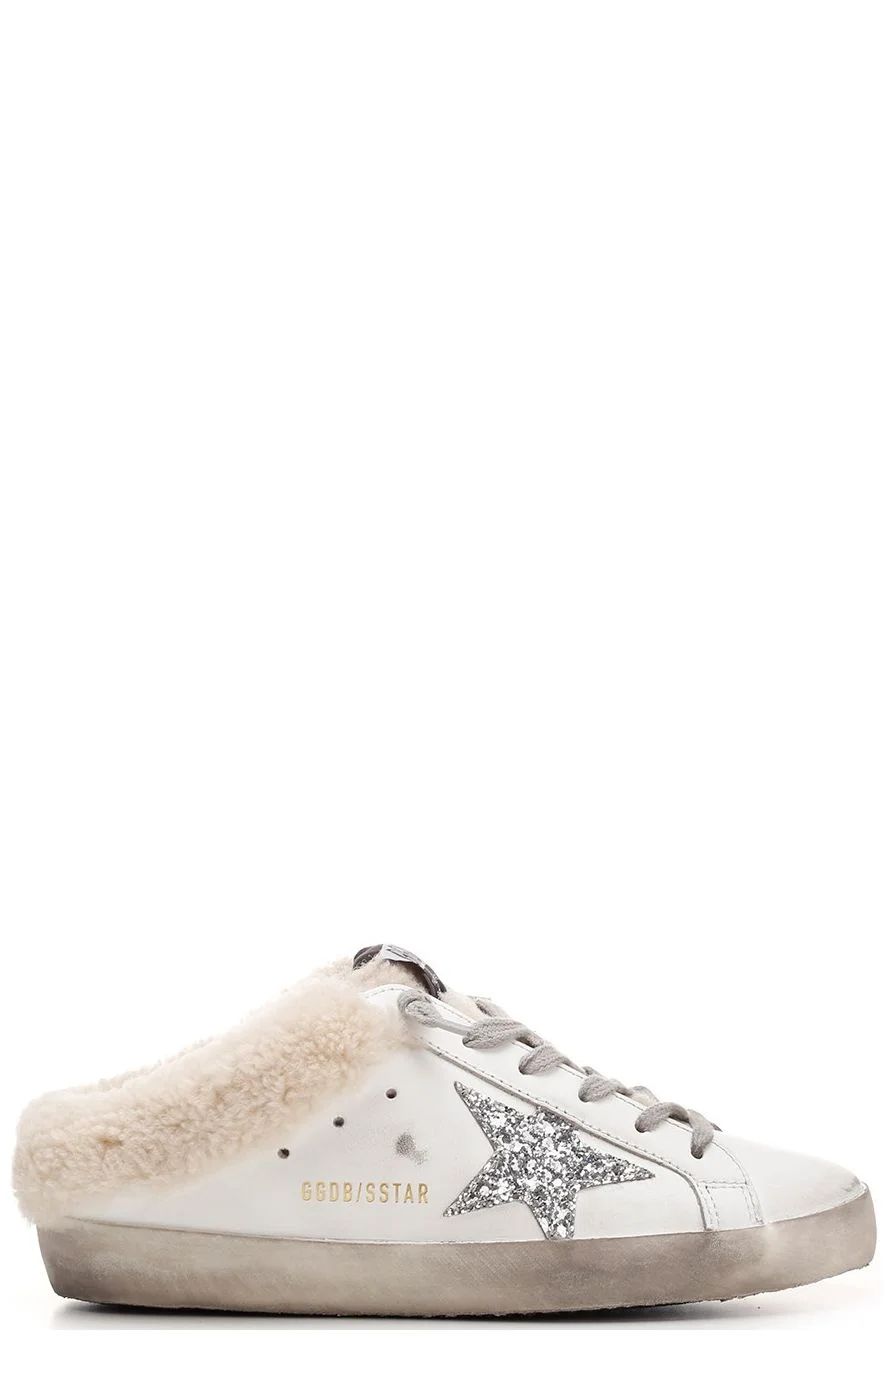 Golden Goose Deluxe Brand Superstar Shearling-Lined Sneakers | Cettire Global